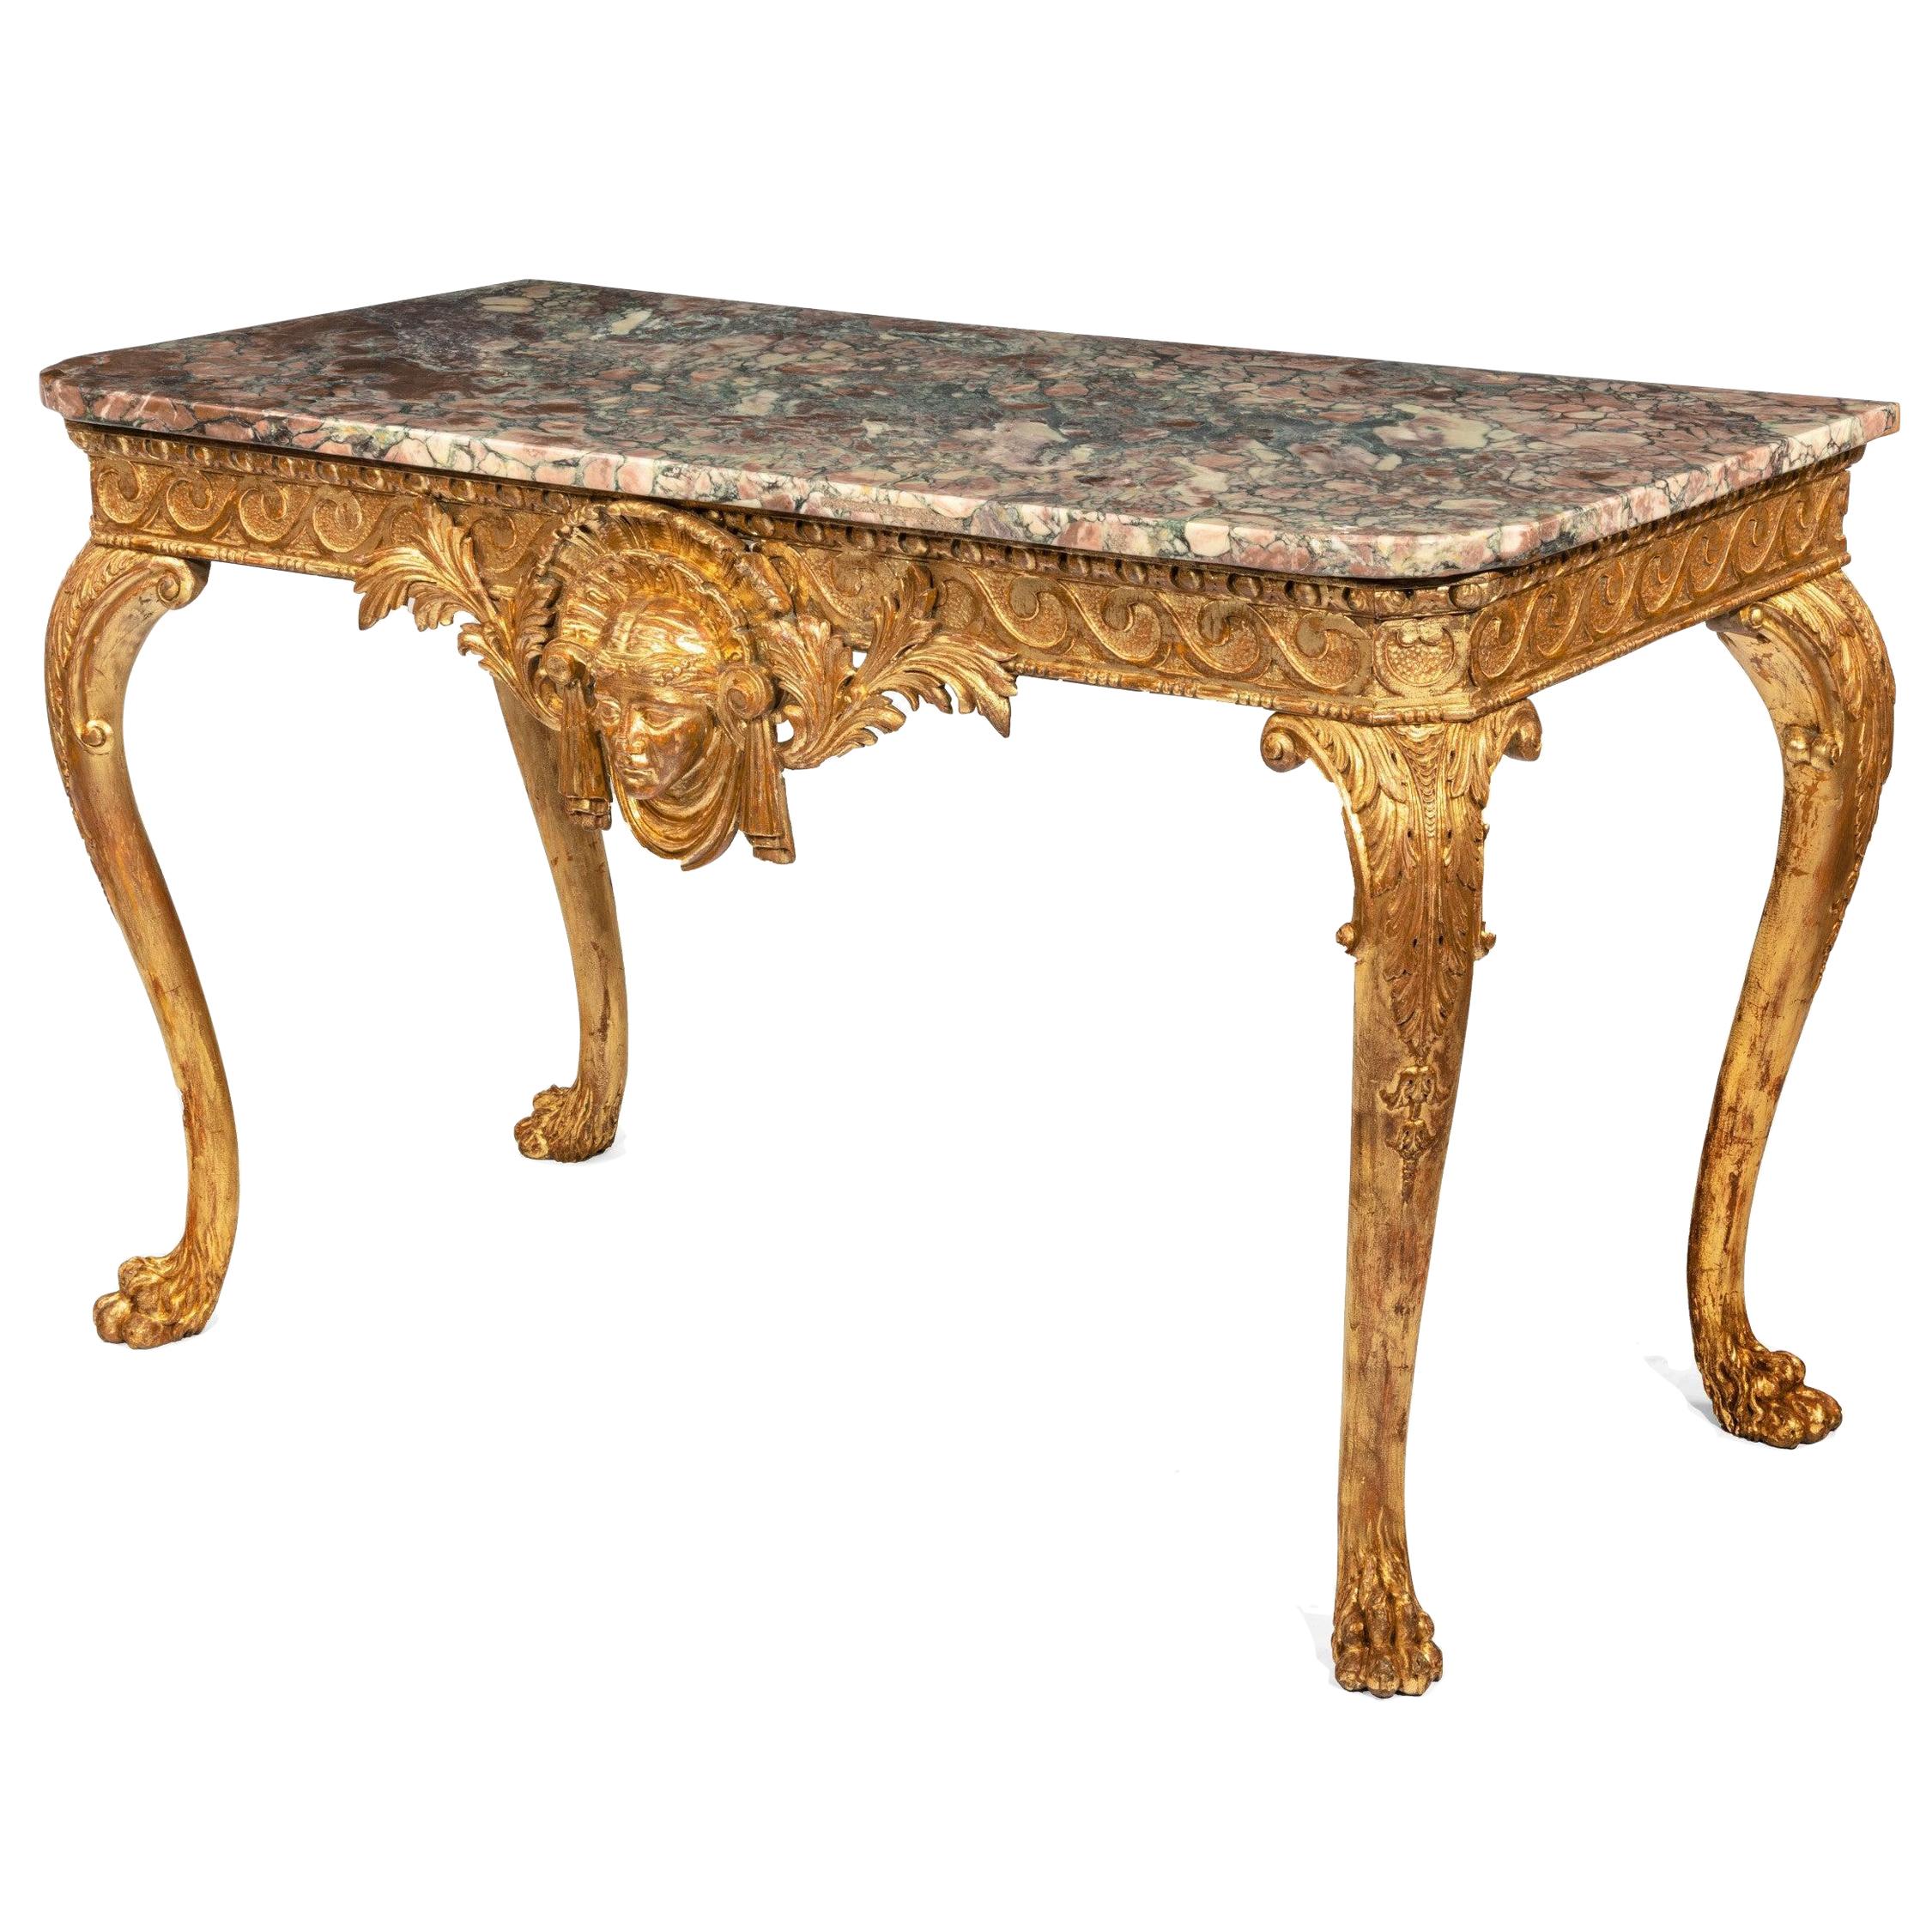 Mid-Victorian Giltwood Console Table